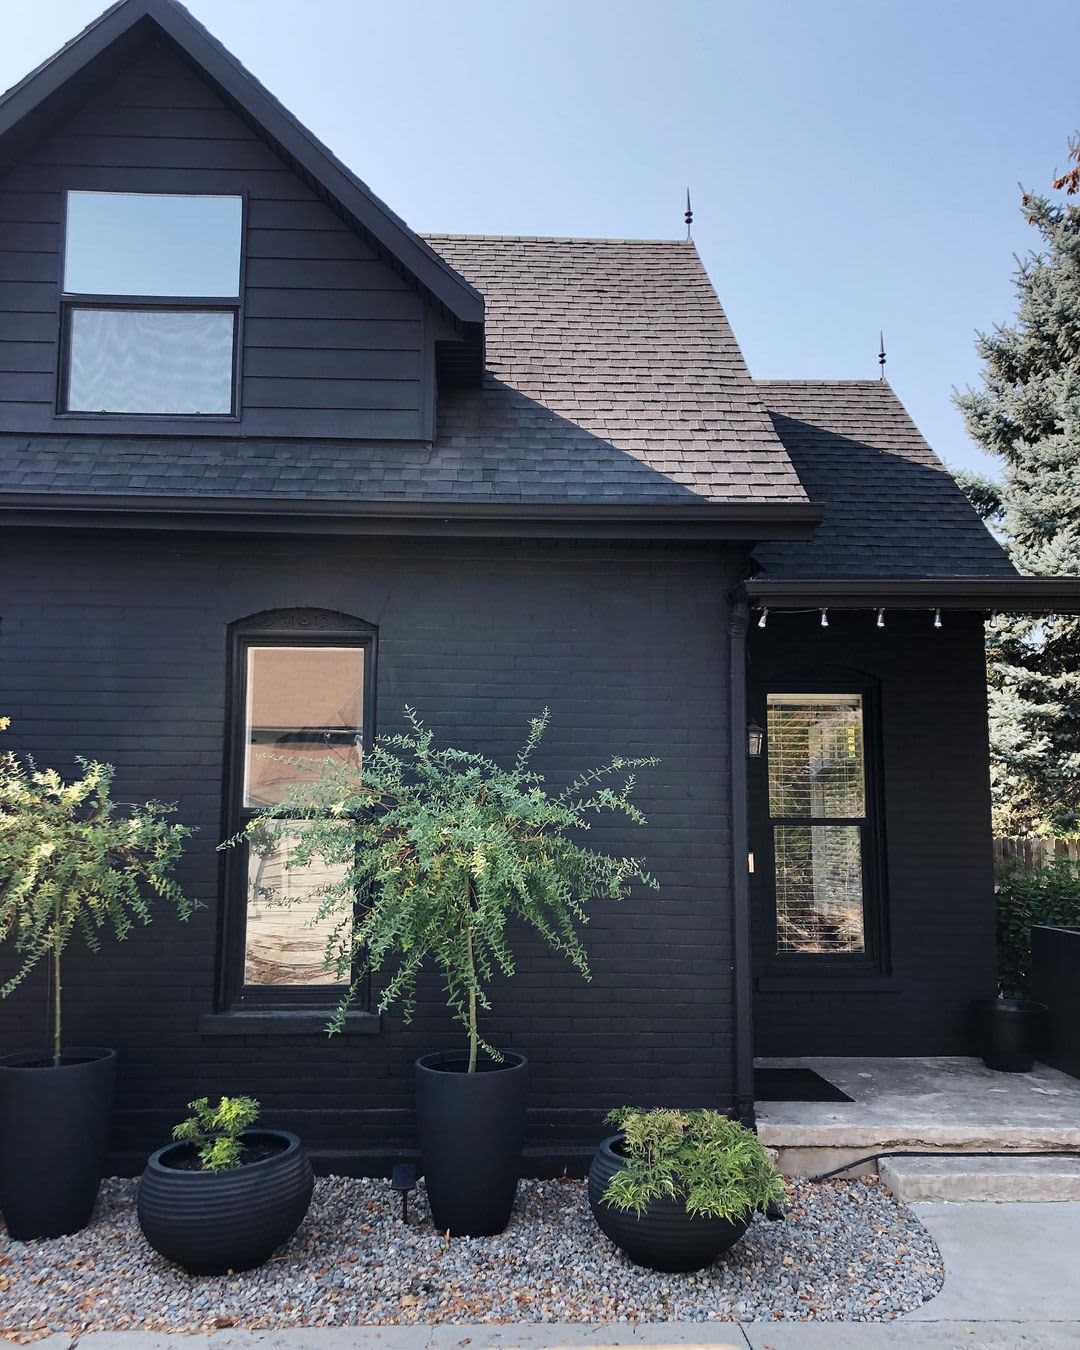 15 Chic Black Houses - All-Black Exteriors For Your Next Repaint ...